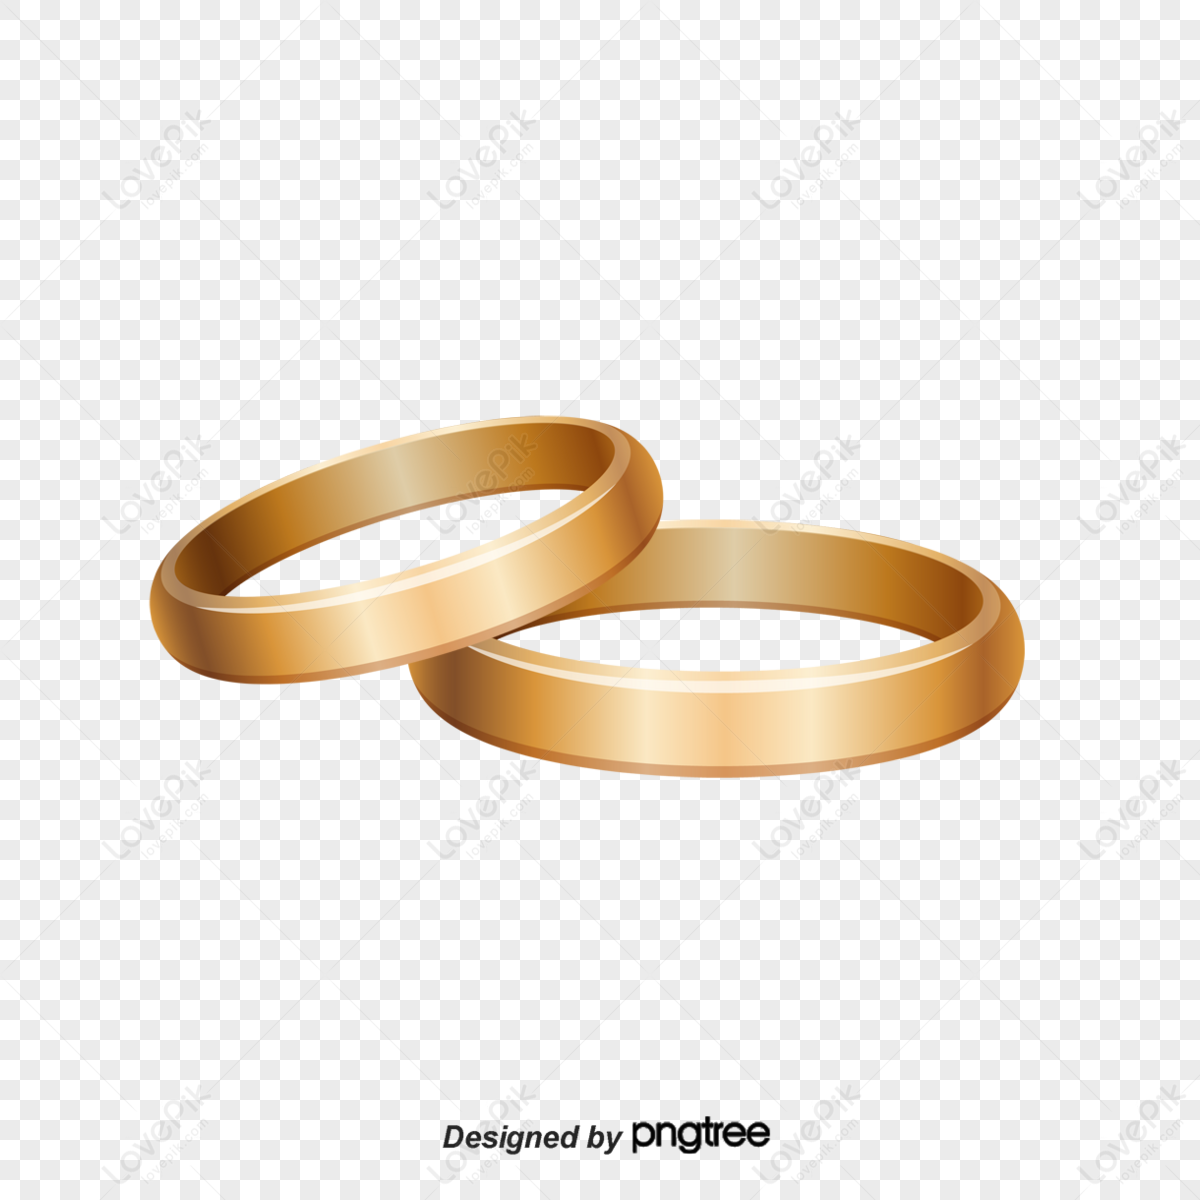 Gold-colored ring illustration, Engagement ring Gold Jewellery Wedding ring,  Gold Rings Background transparent background PNG clipart | HiClipart